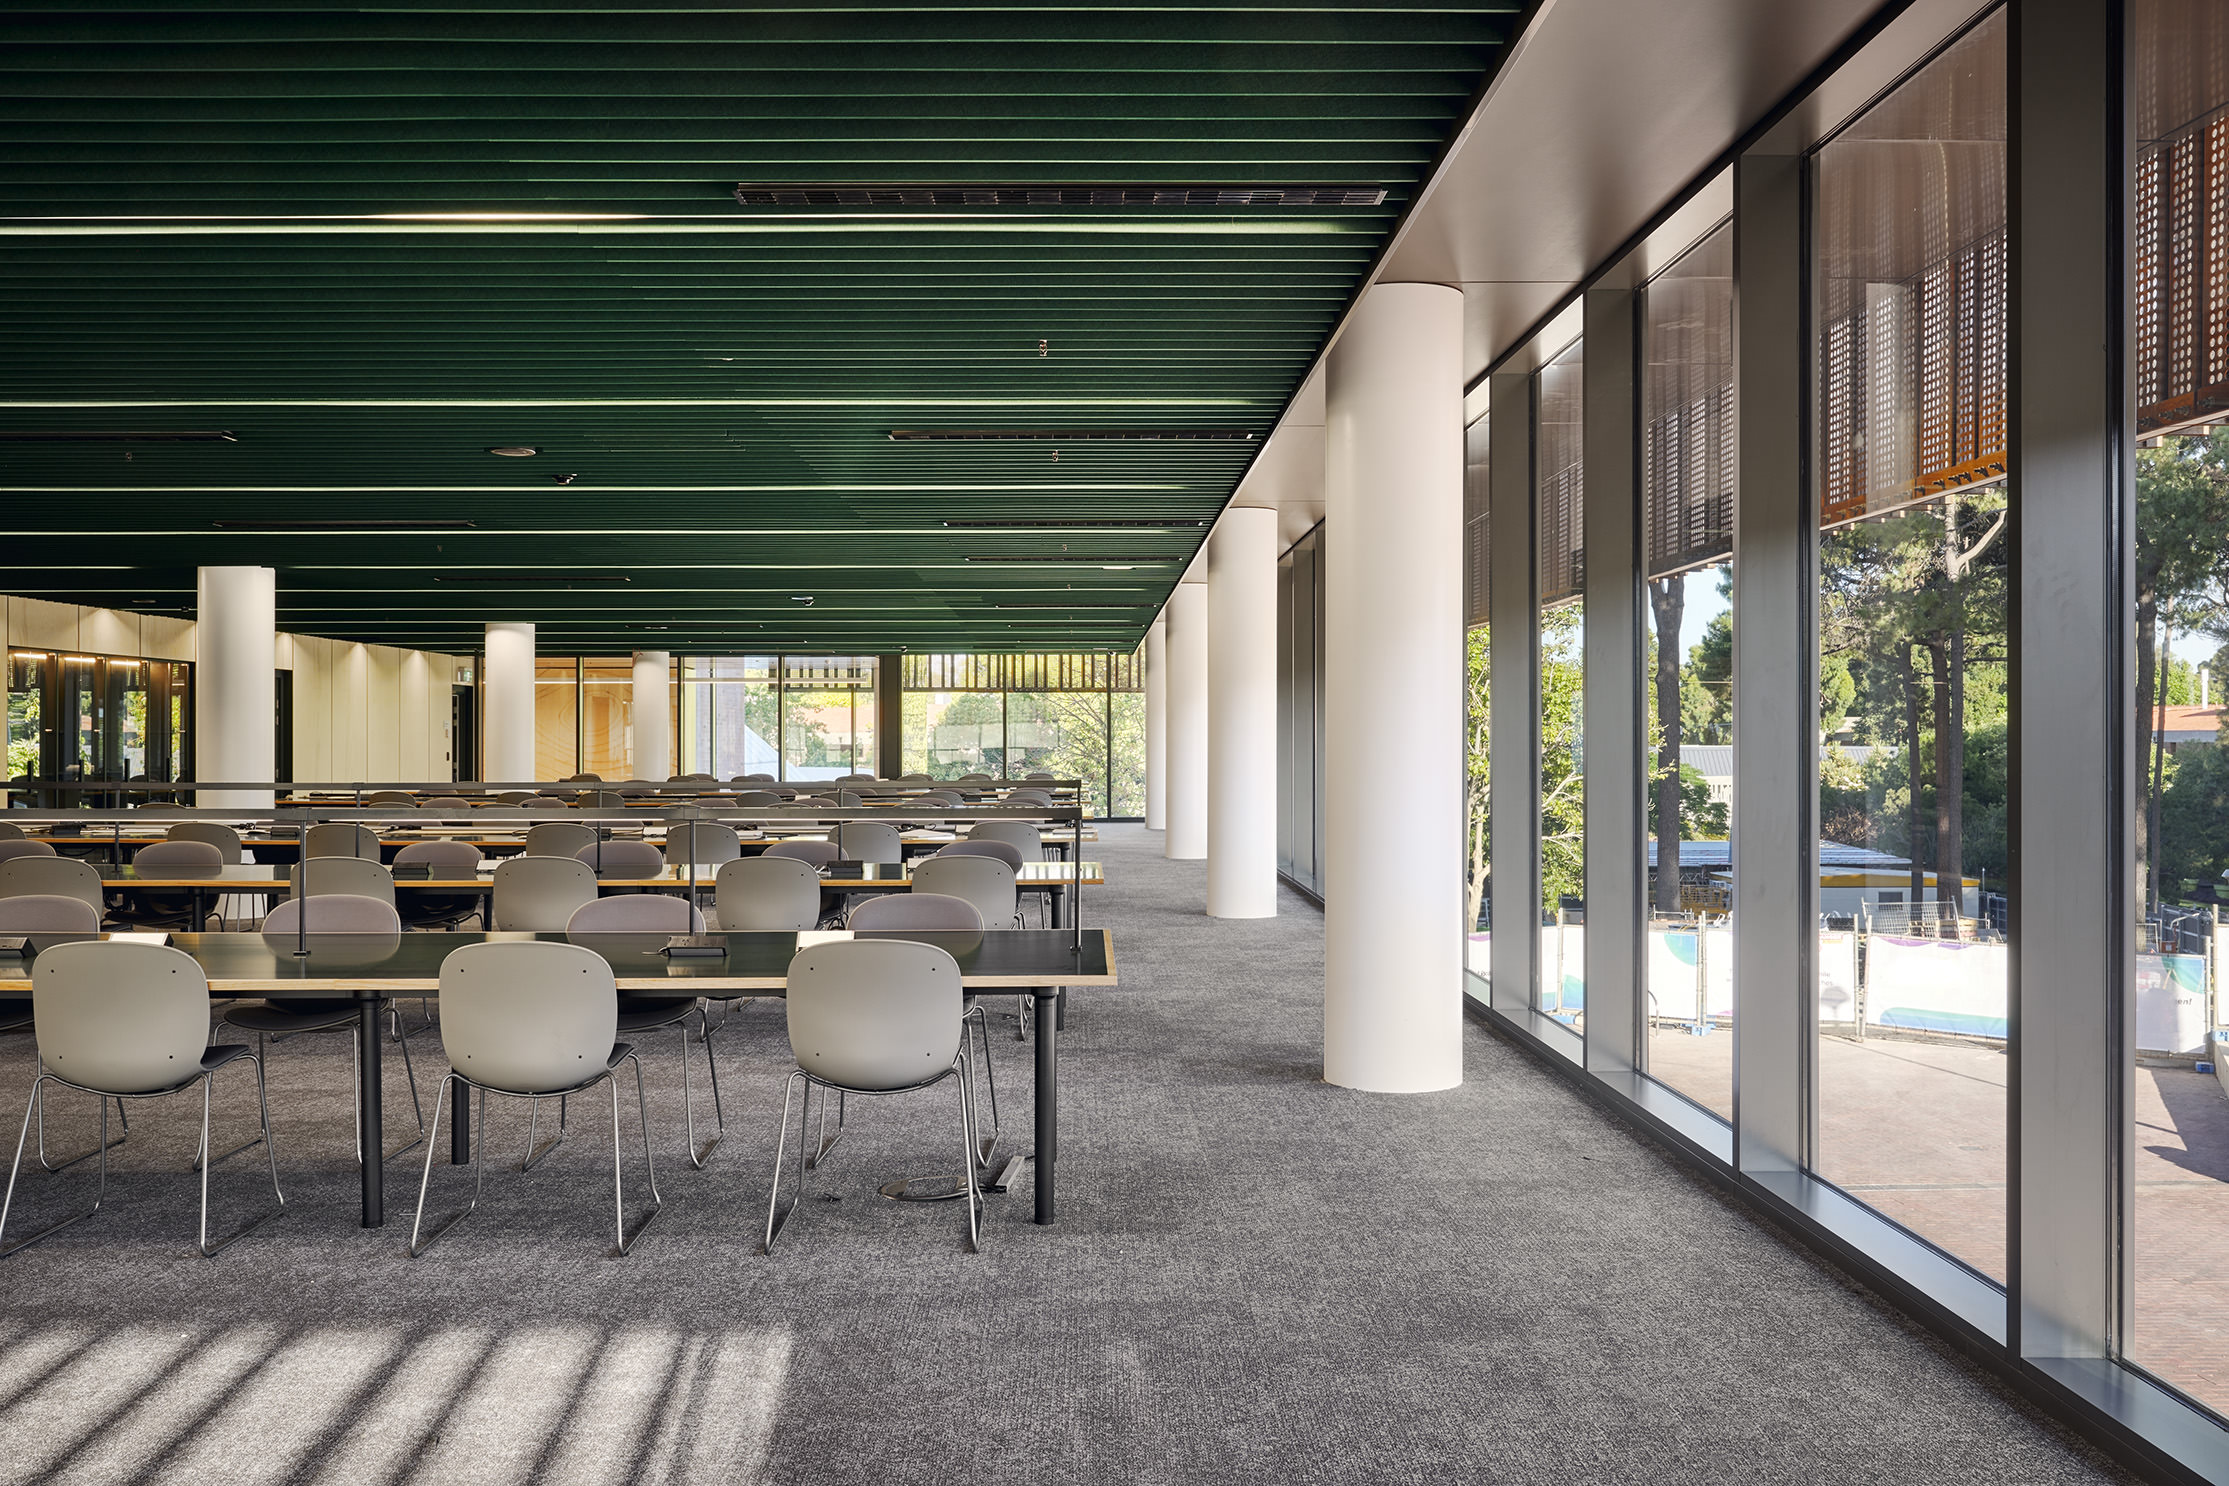 grey chairs and green desks in the bright library space. there are windows to the right.